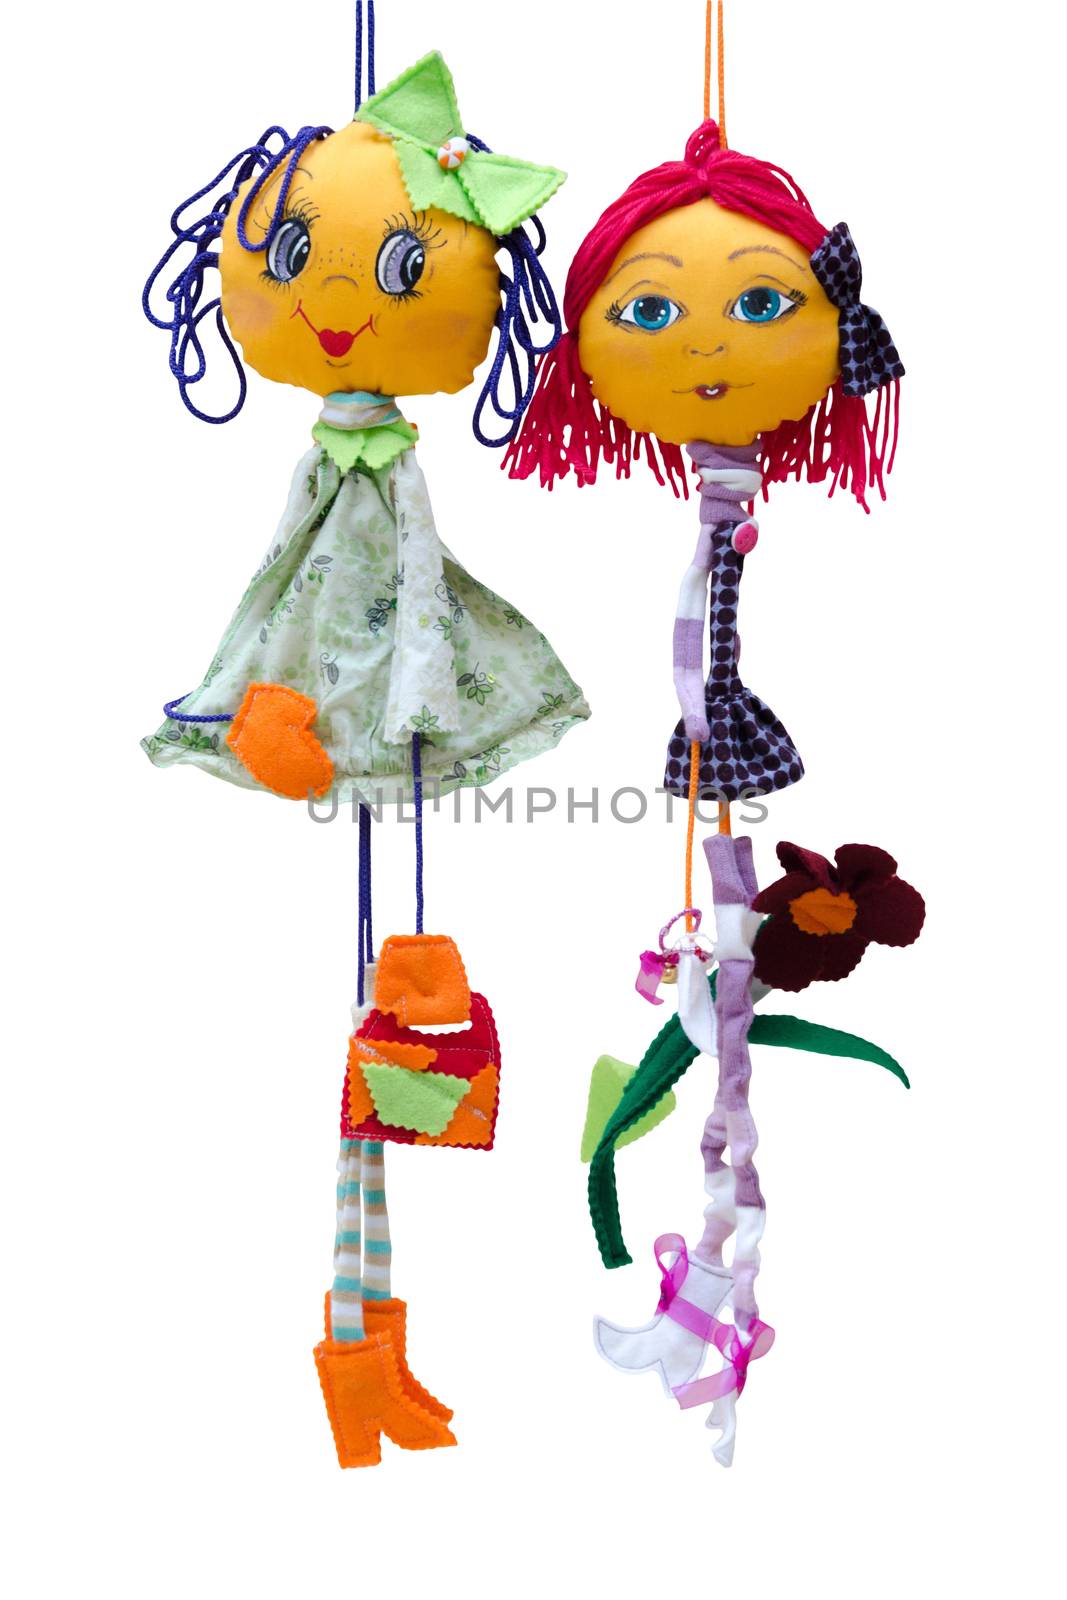 The Handmade dolls toys isolated thin cheerful girls in short fashionable dresses